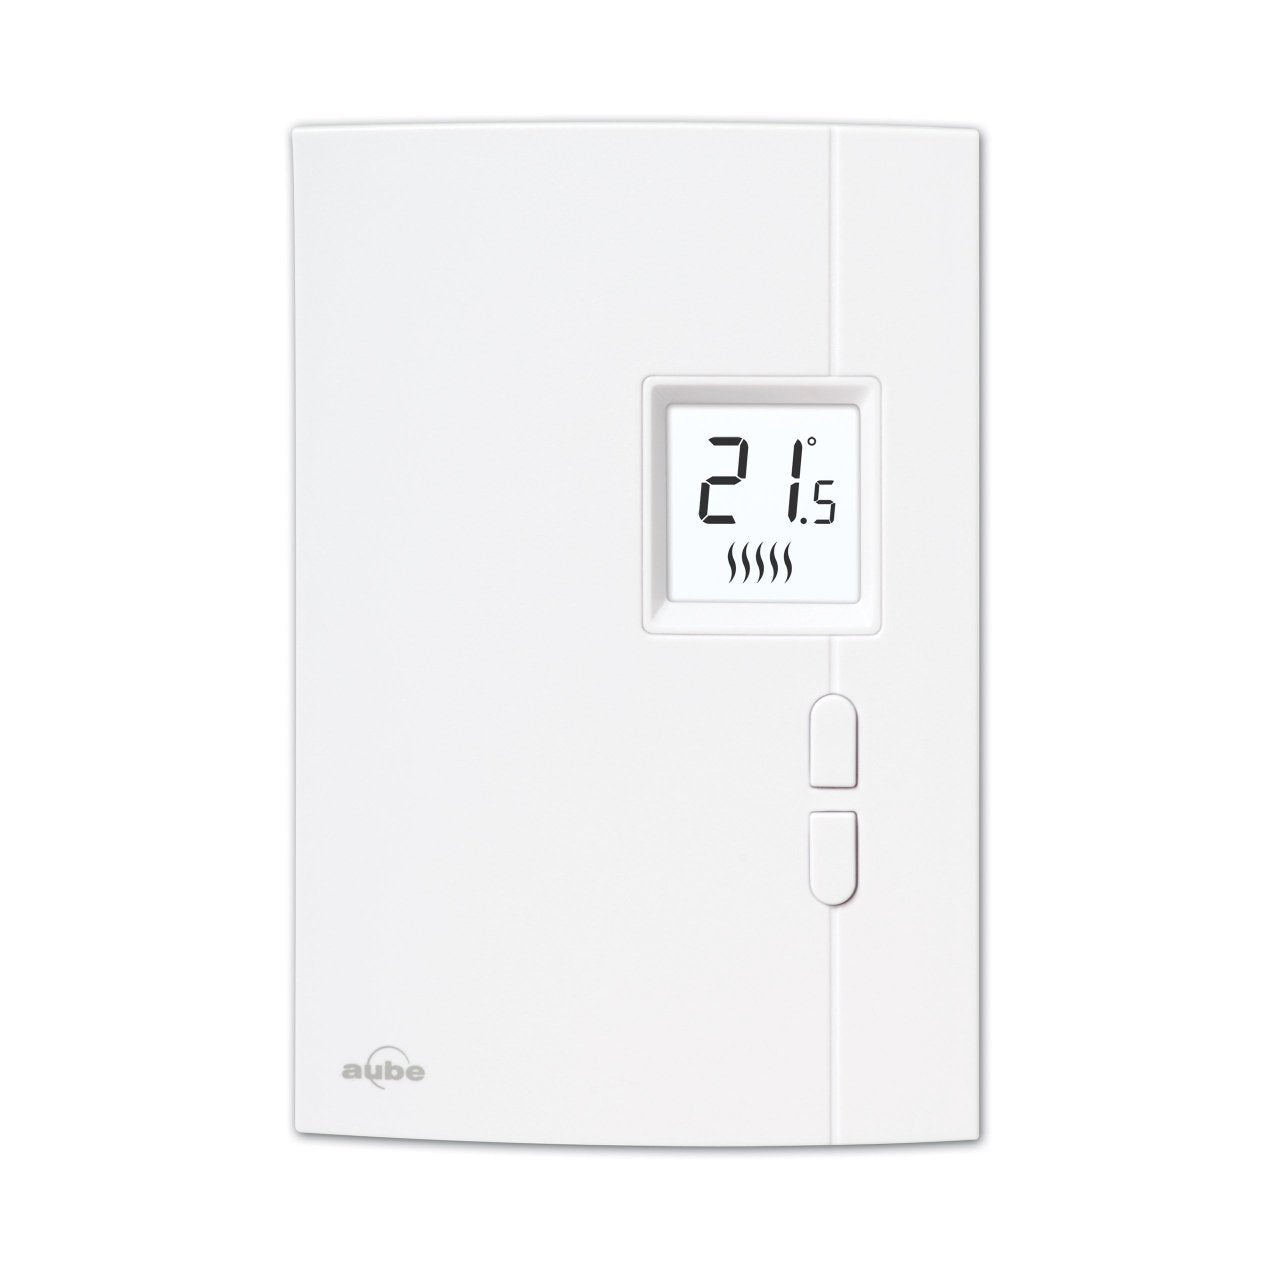 pilot surge Silver Ouellet Non Programmable Electronic Thermostat 10.4A@120-240V (Resistive  Only), Model TH401* | Orka.ca